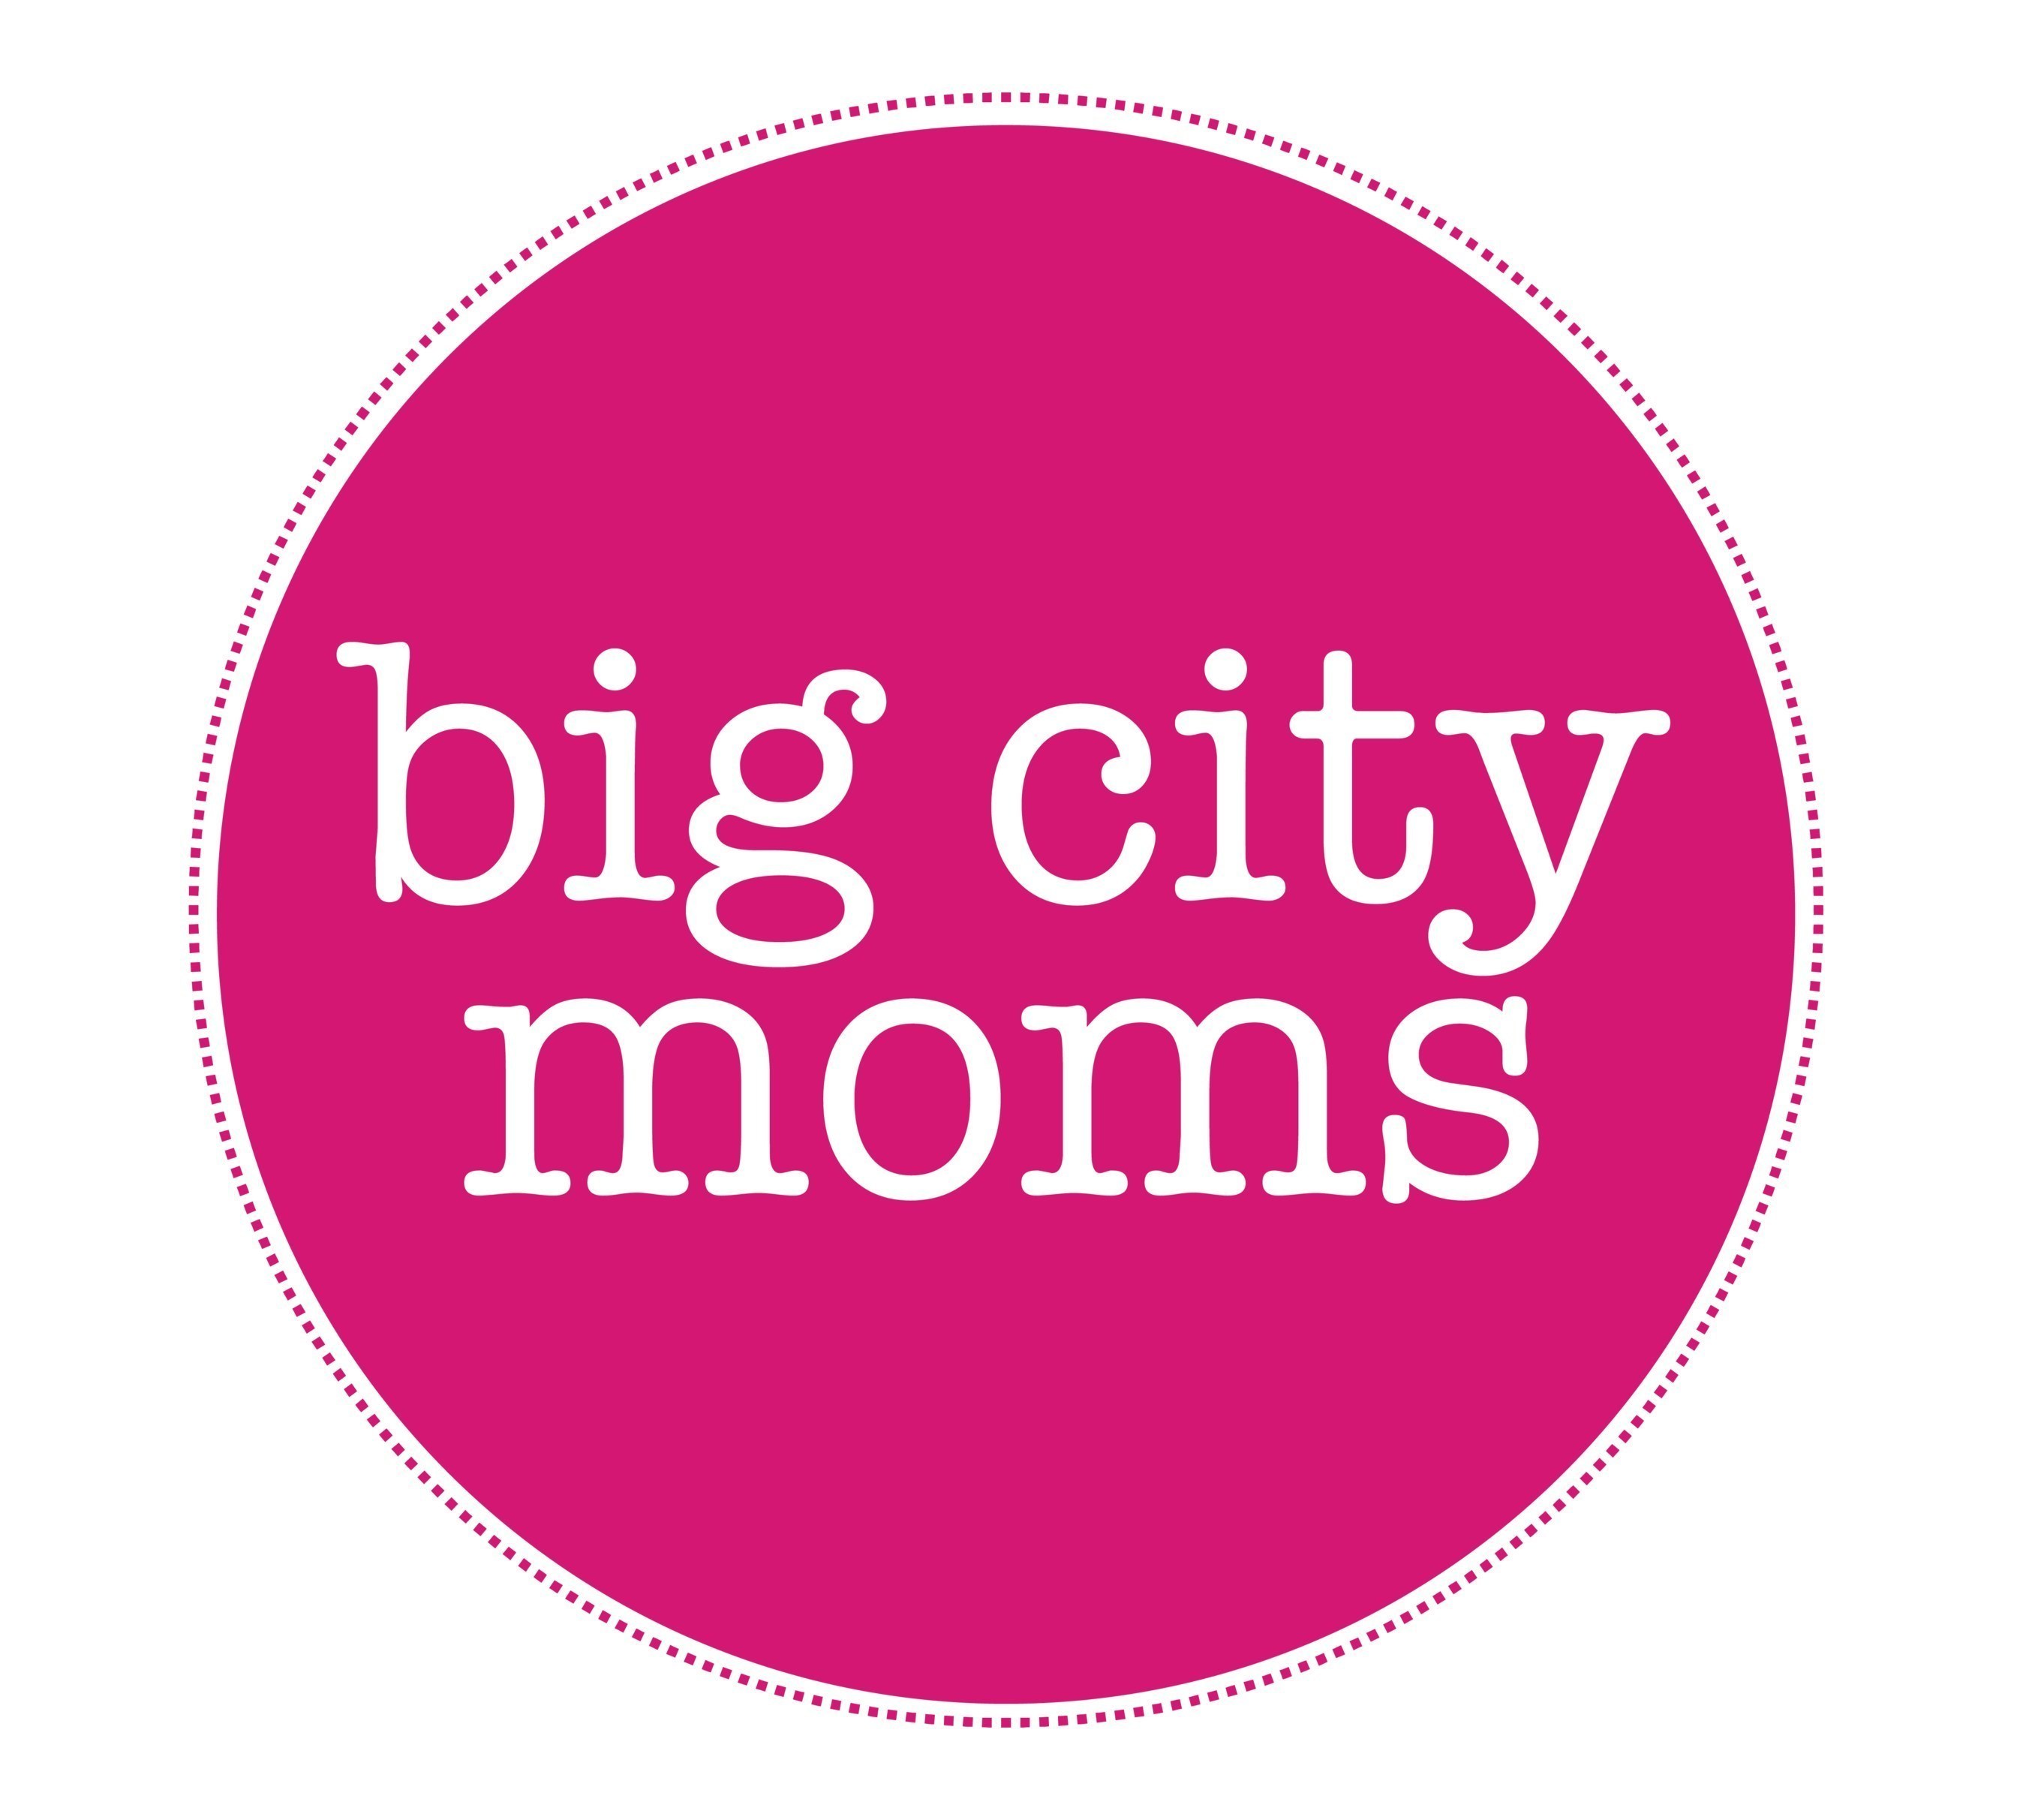 Sparks announced today its expansion from "event agency" to "event owner" with its acquisition of Big City Moms (BCM).